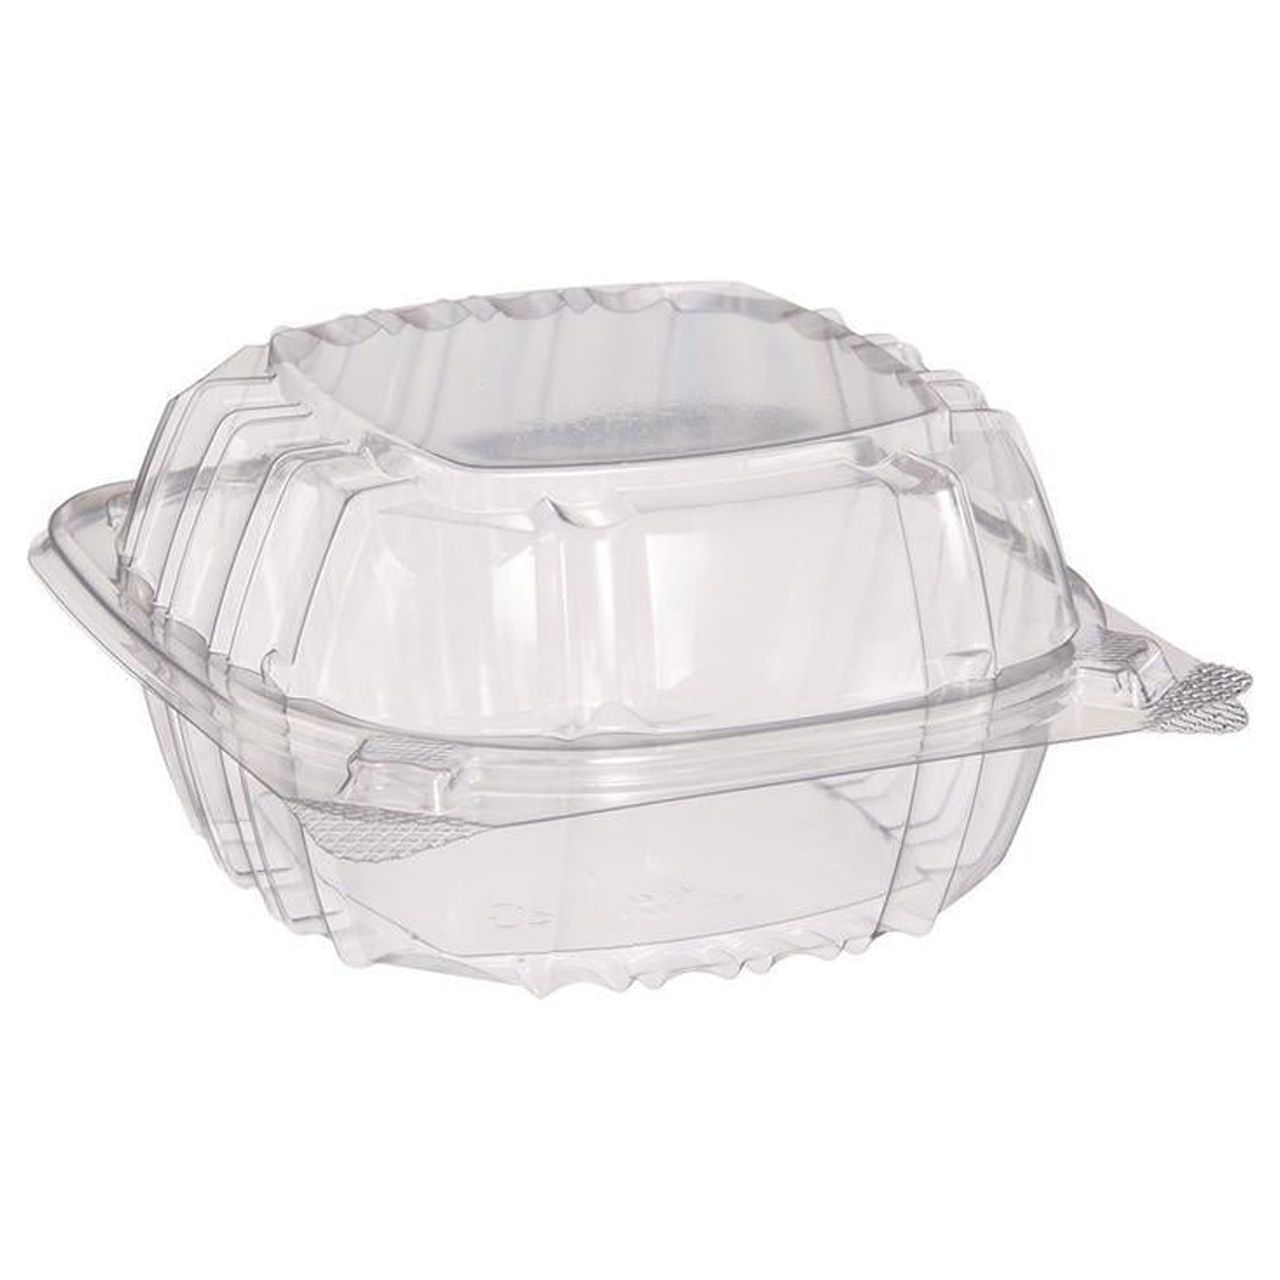 Dart ClearSeal Hinged-Lid Plastic Containers, 5.8 x 6 x 3, Clear, Plastic, 125/Pack, 4 Packs/Carton - image 1 of 4